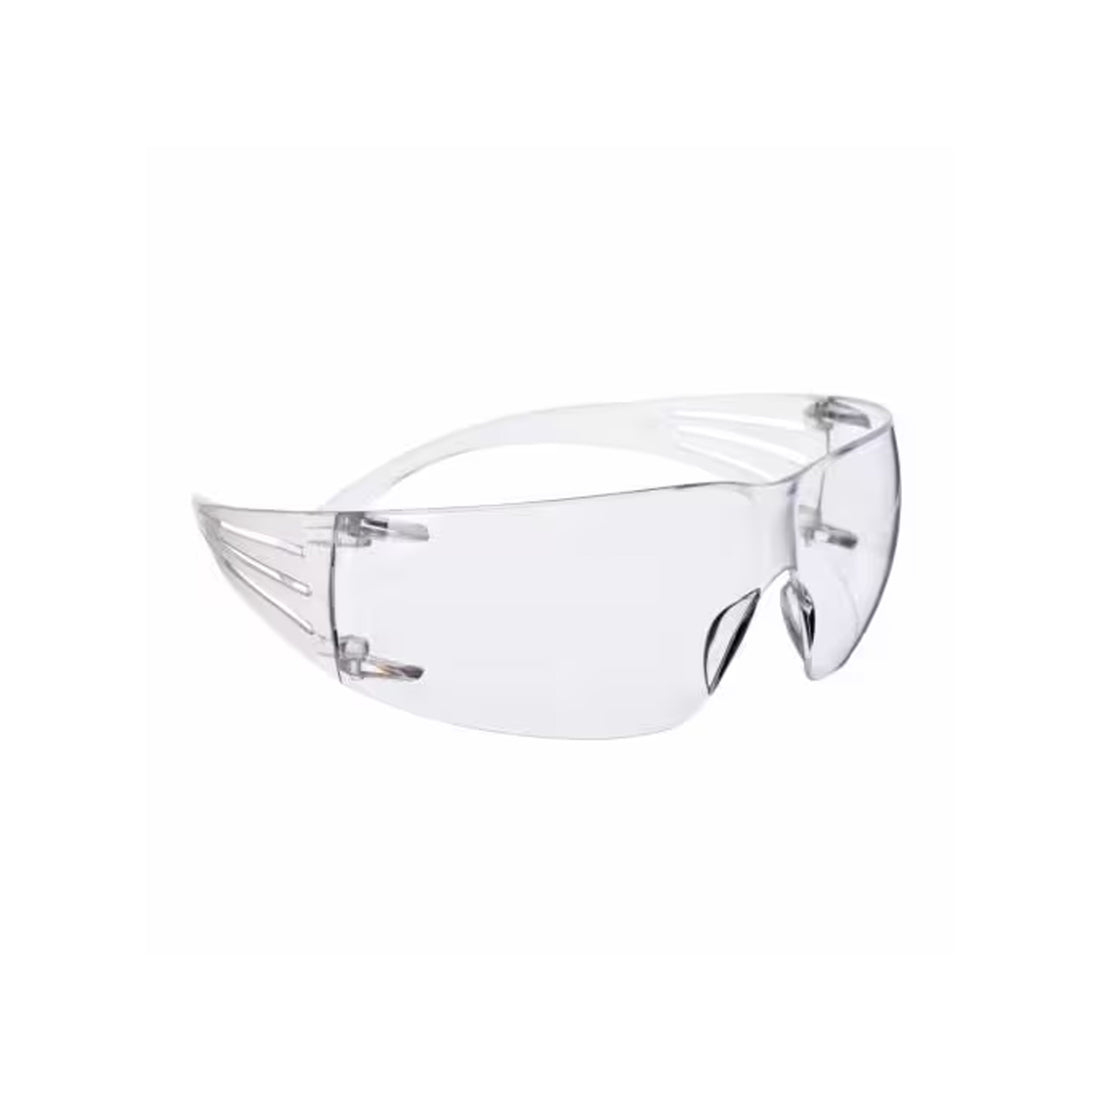 3M Safety Goggle 1 pair